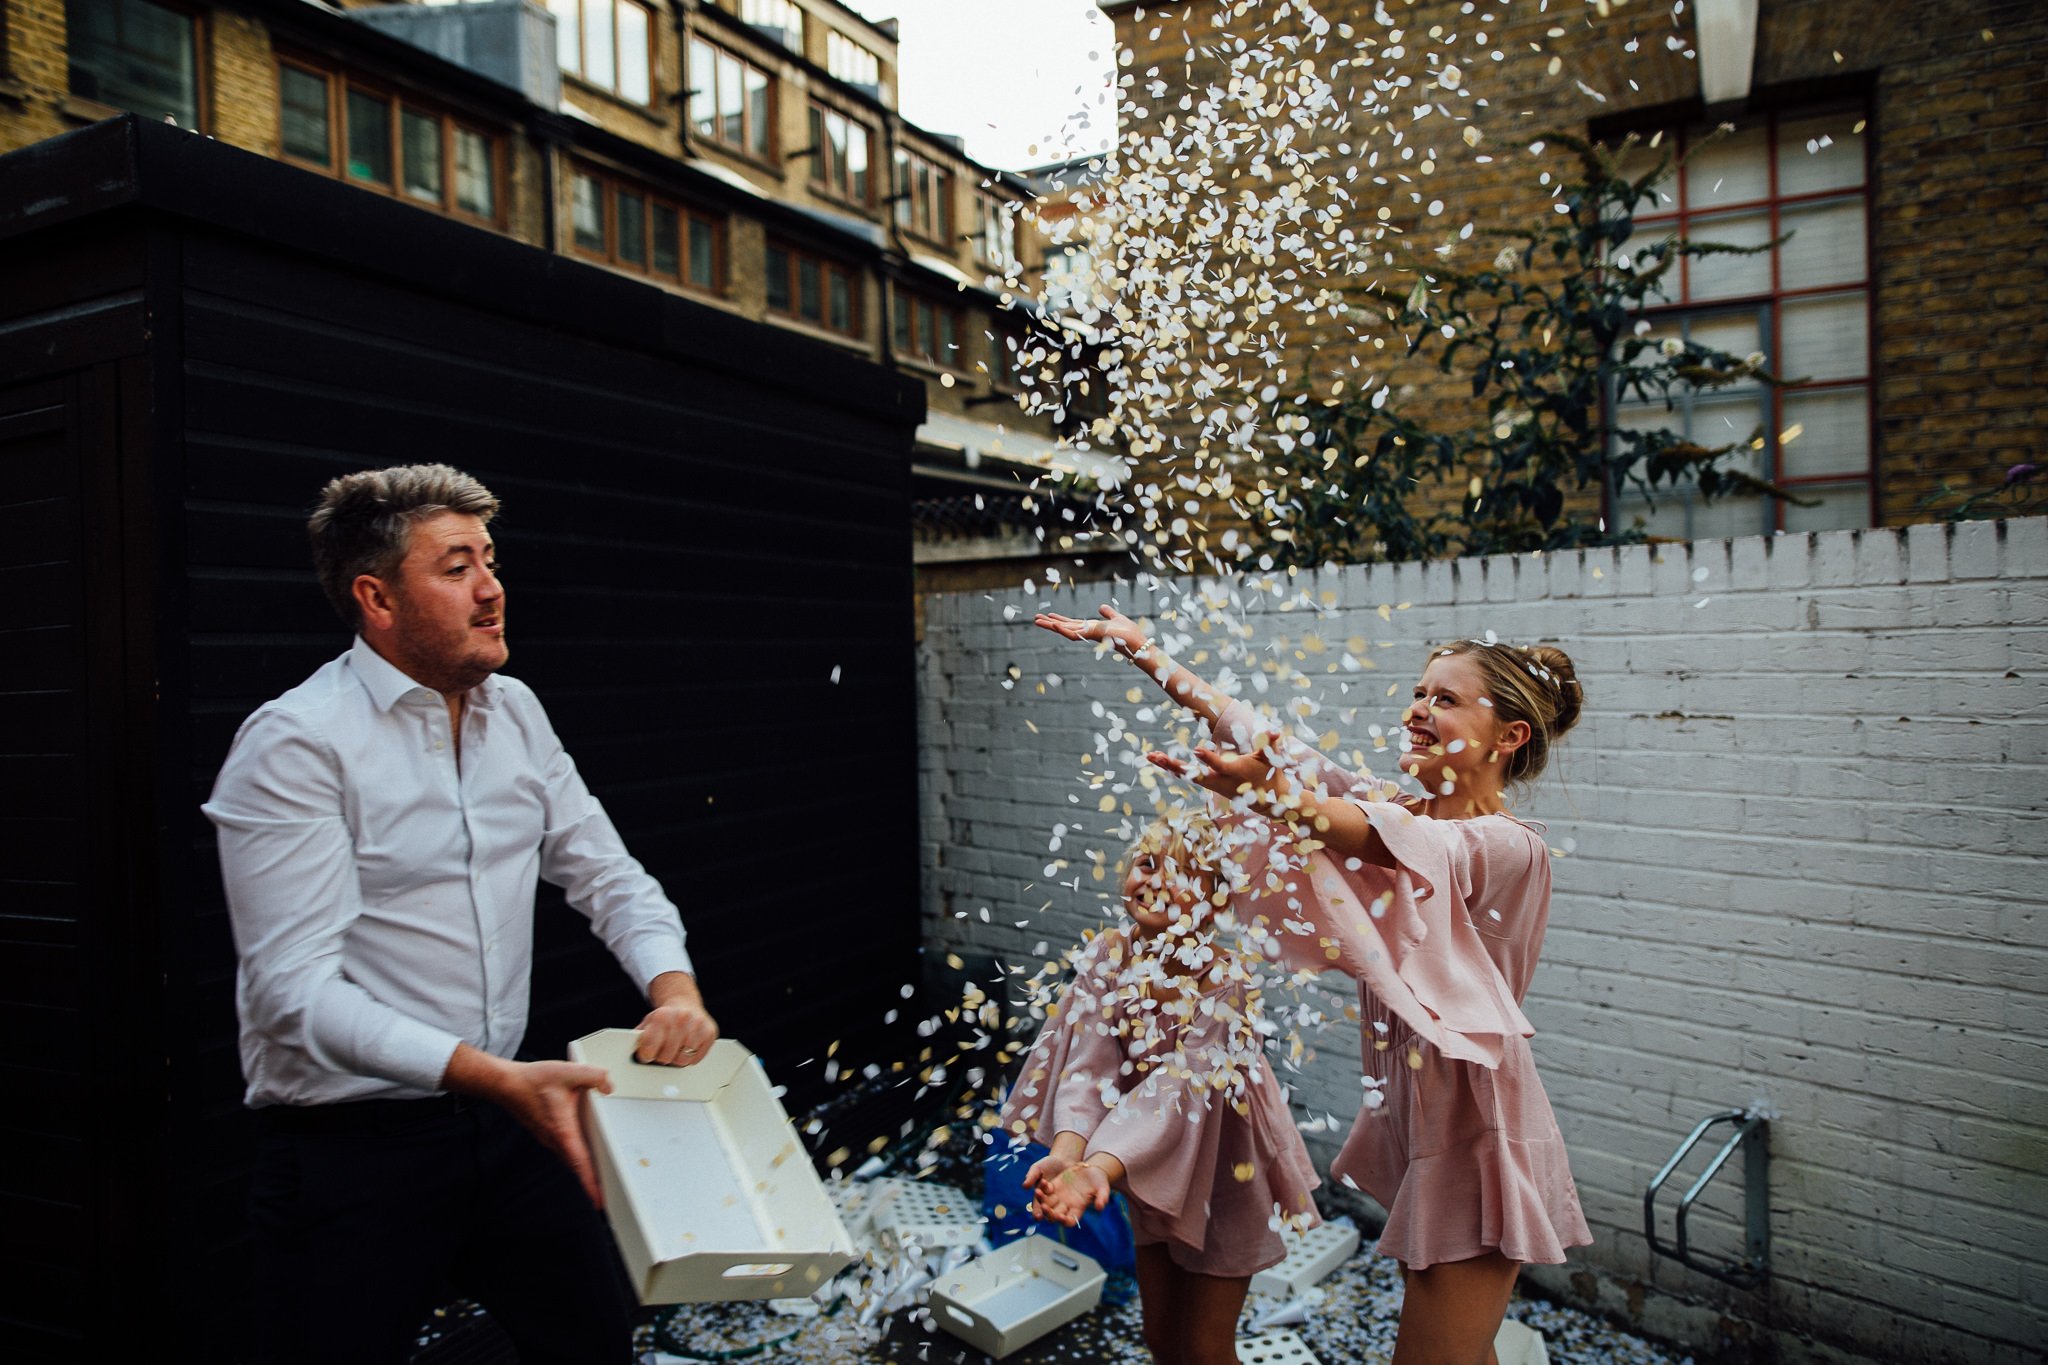  Girls play with confetti. 